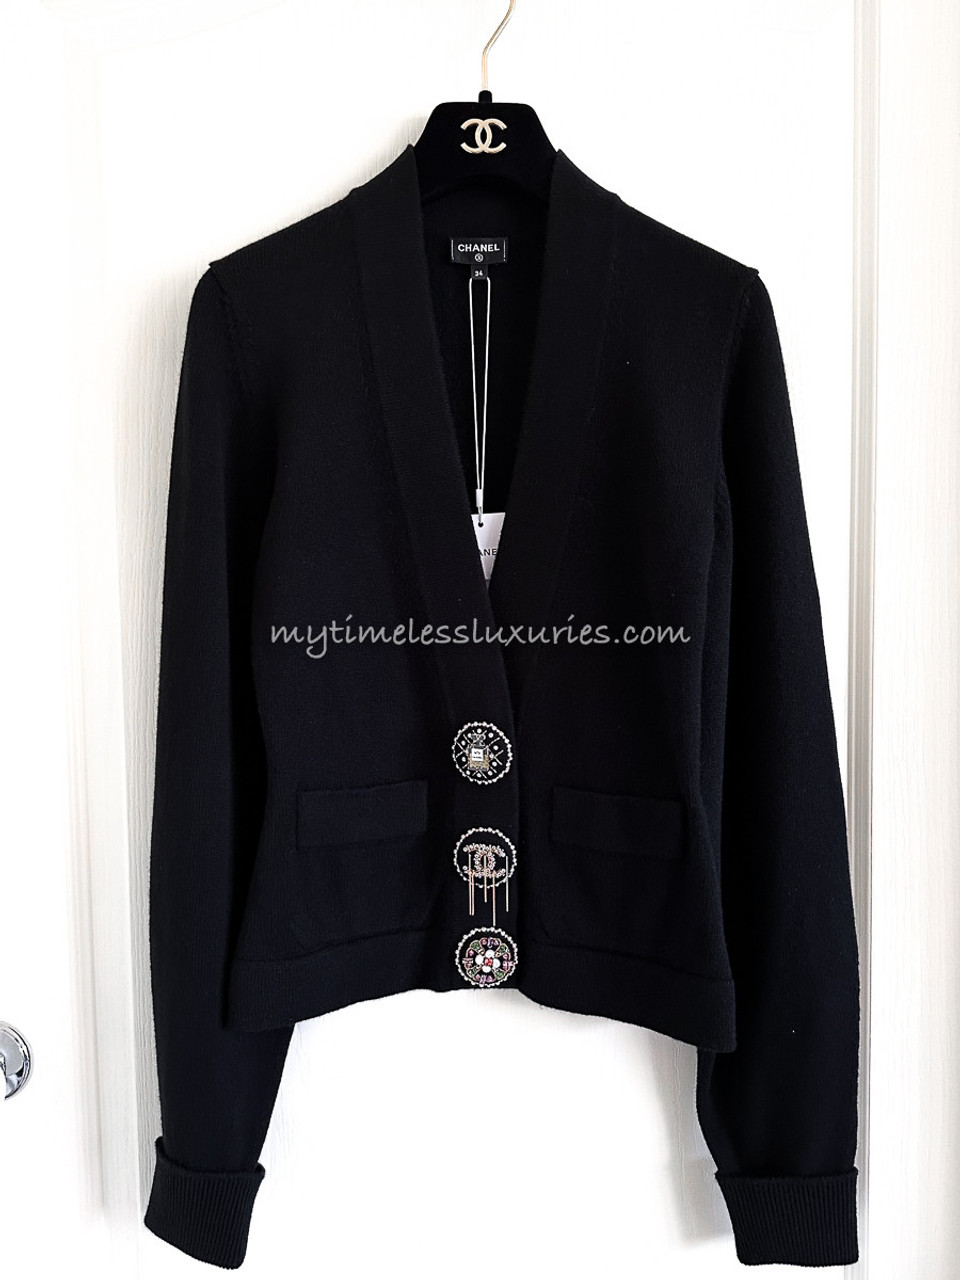 Cardigan ZARA Chanel style black and white Womens Fashion Coats Jackets  and Outerwear on Carousell